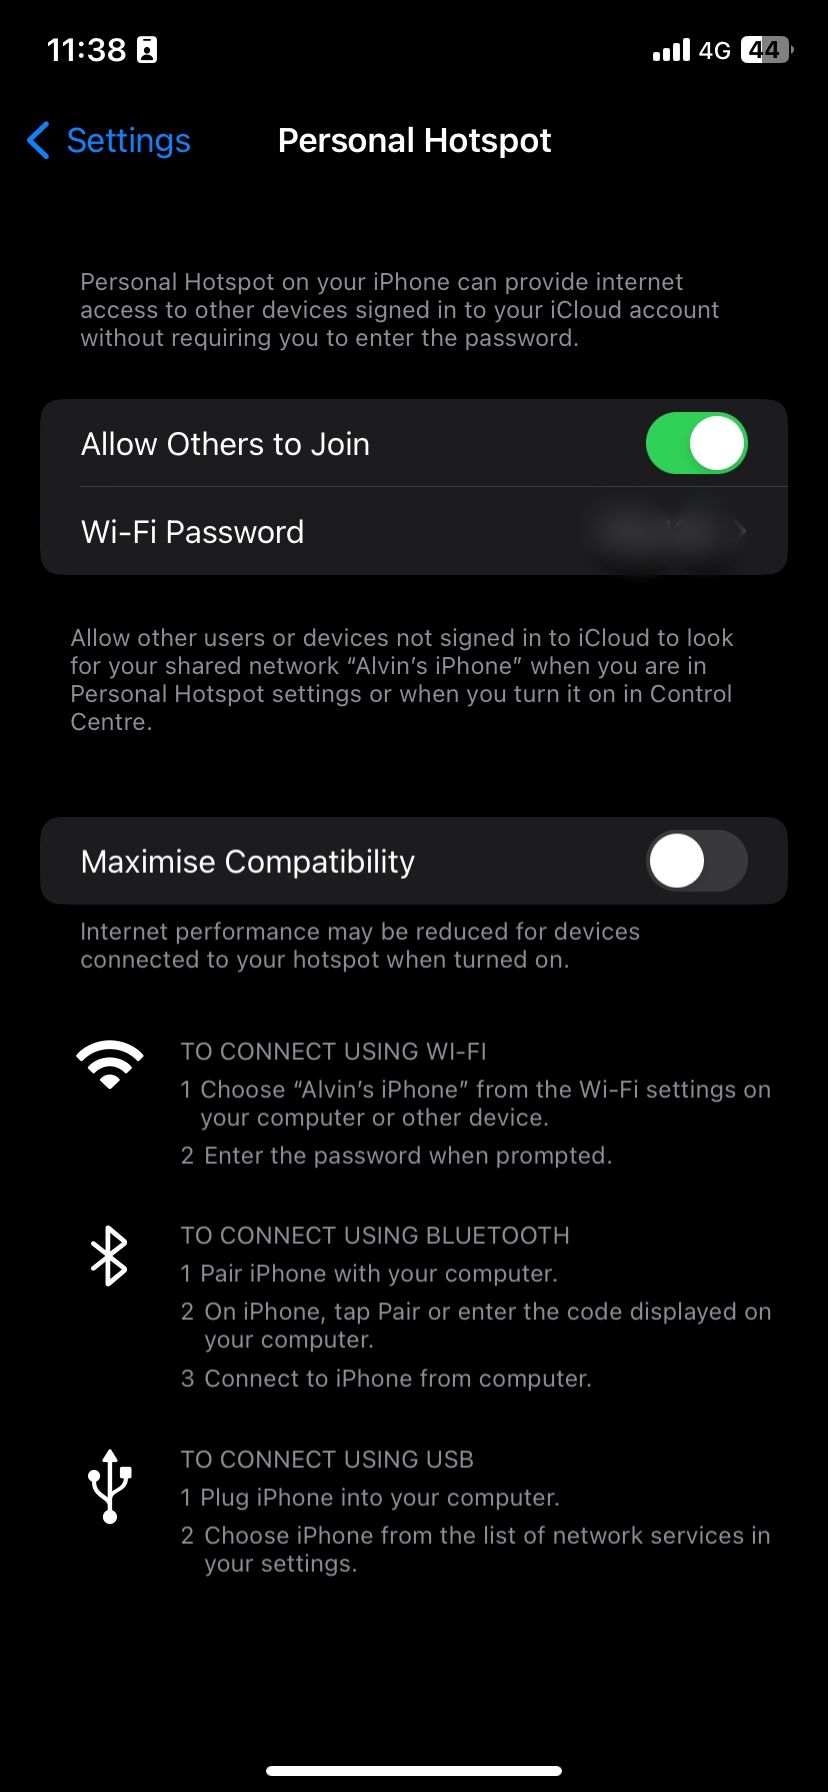 iPhone with Mobile Hotspot enabled